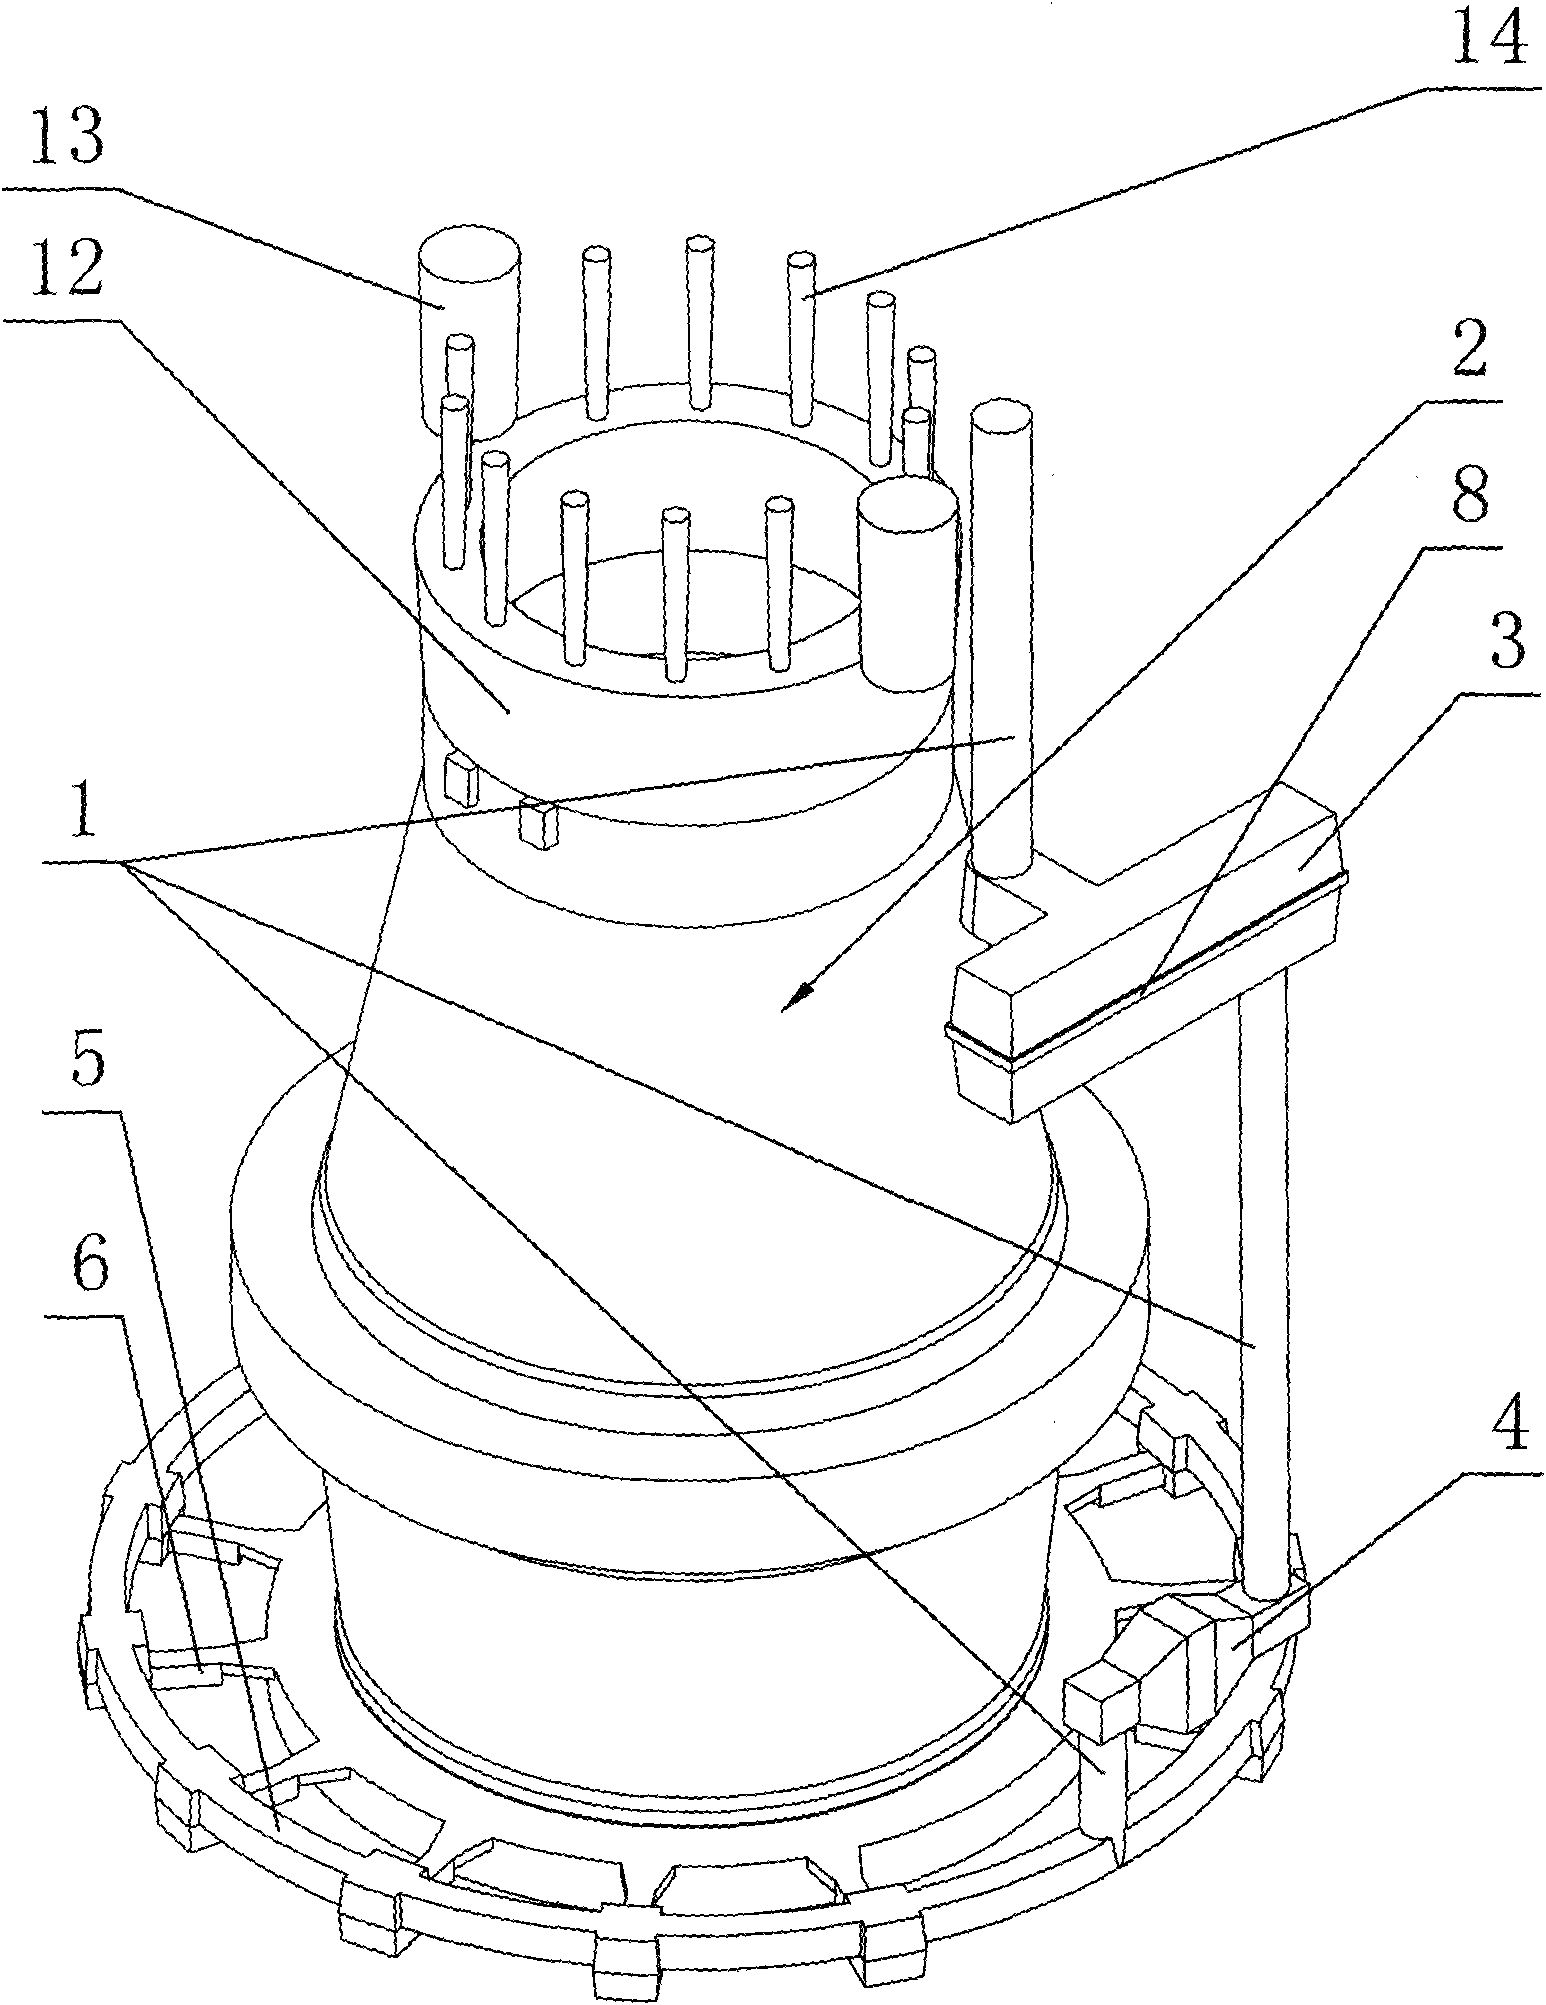 Method for casting rotary axis casts of aerogenerators